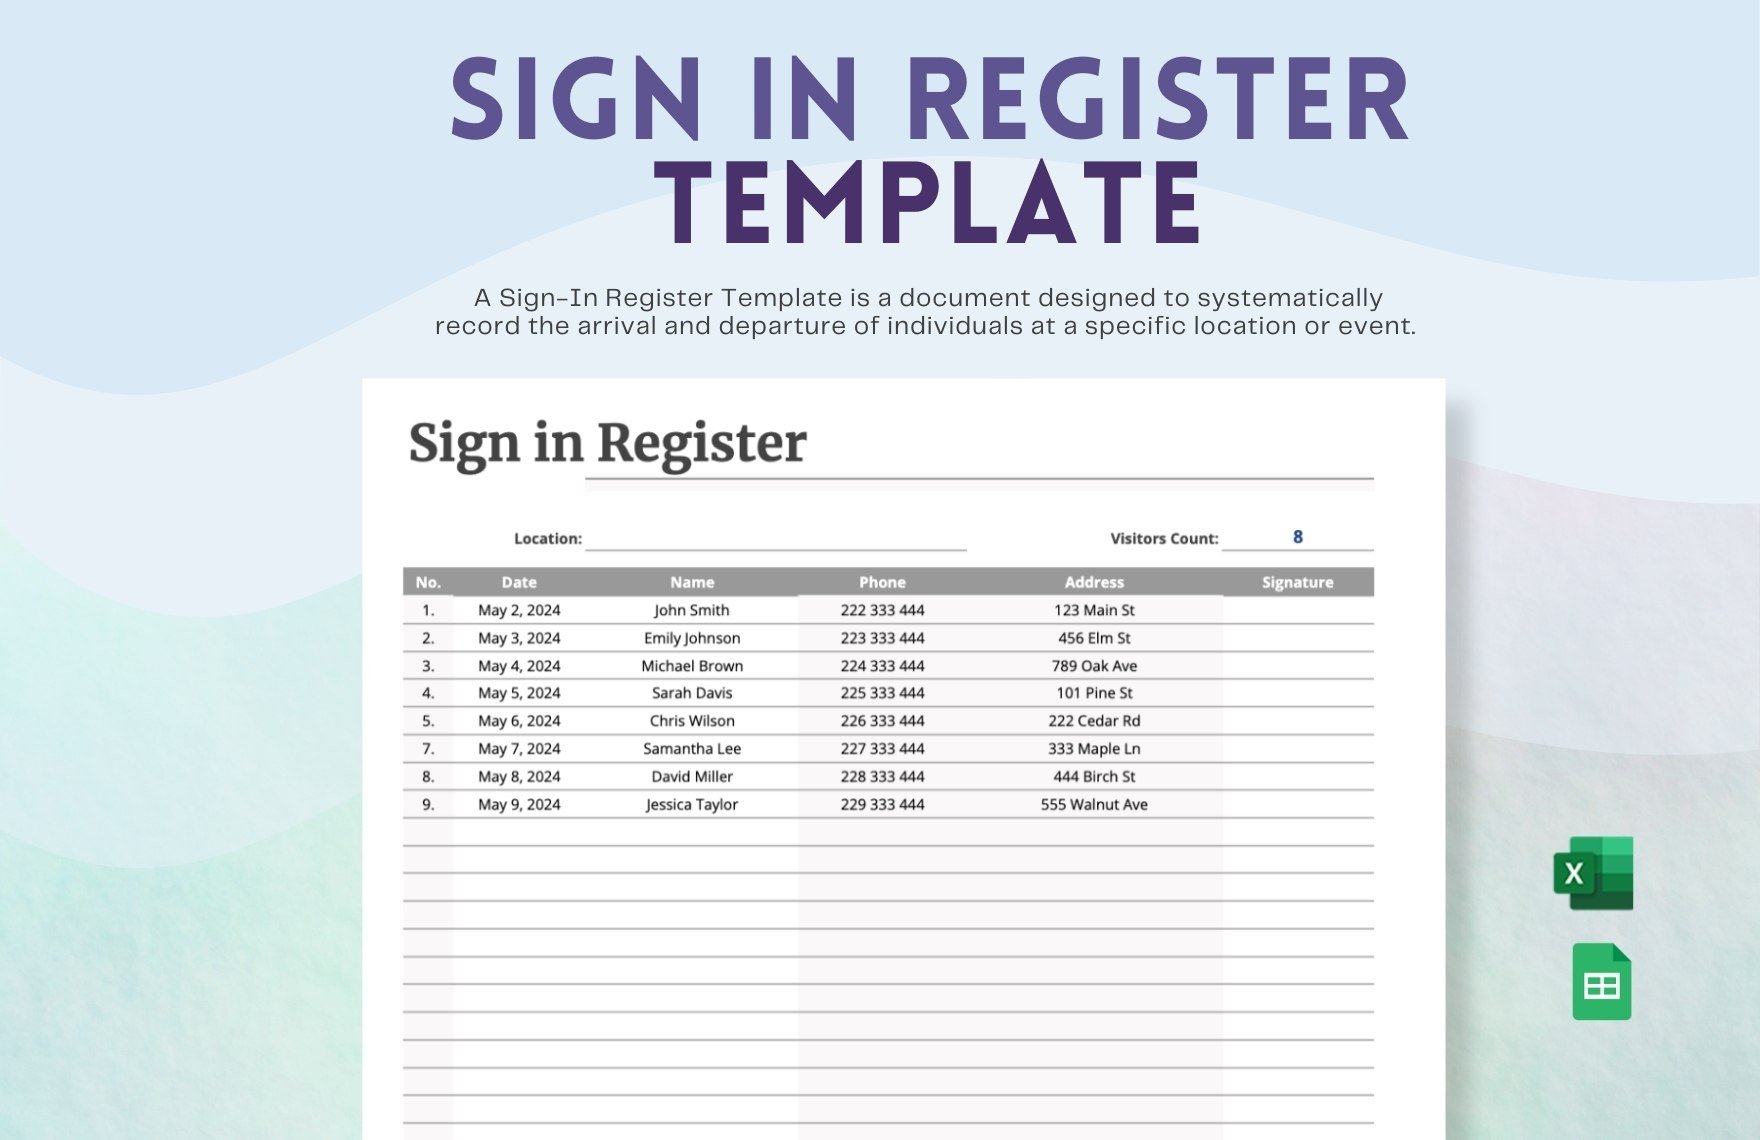 Sign in Register Template in Excel, Google Sheets